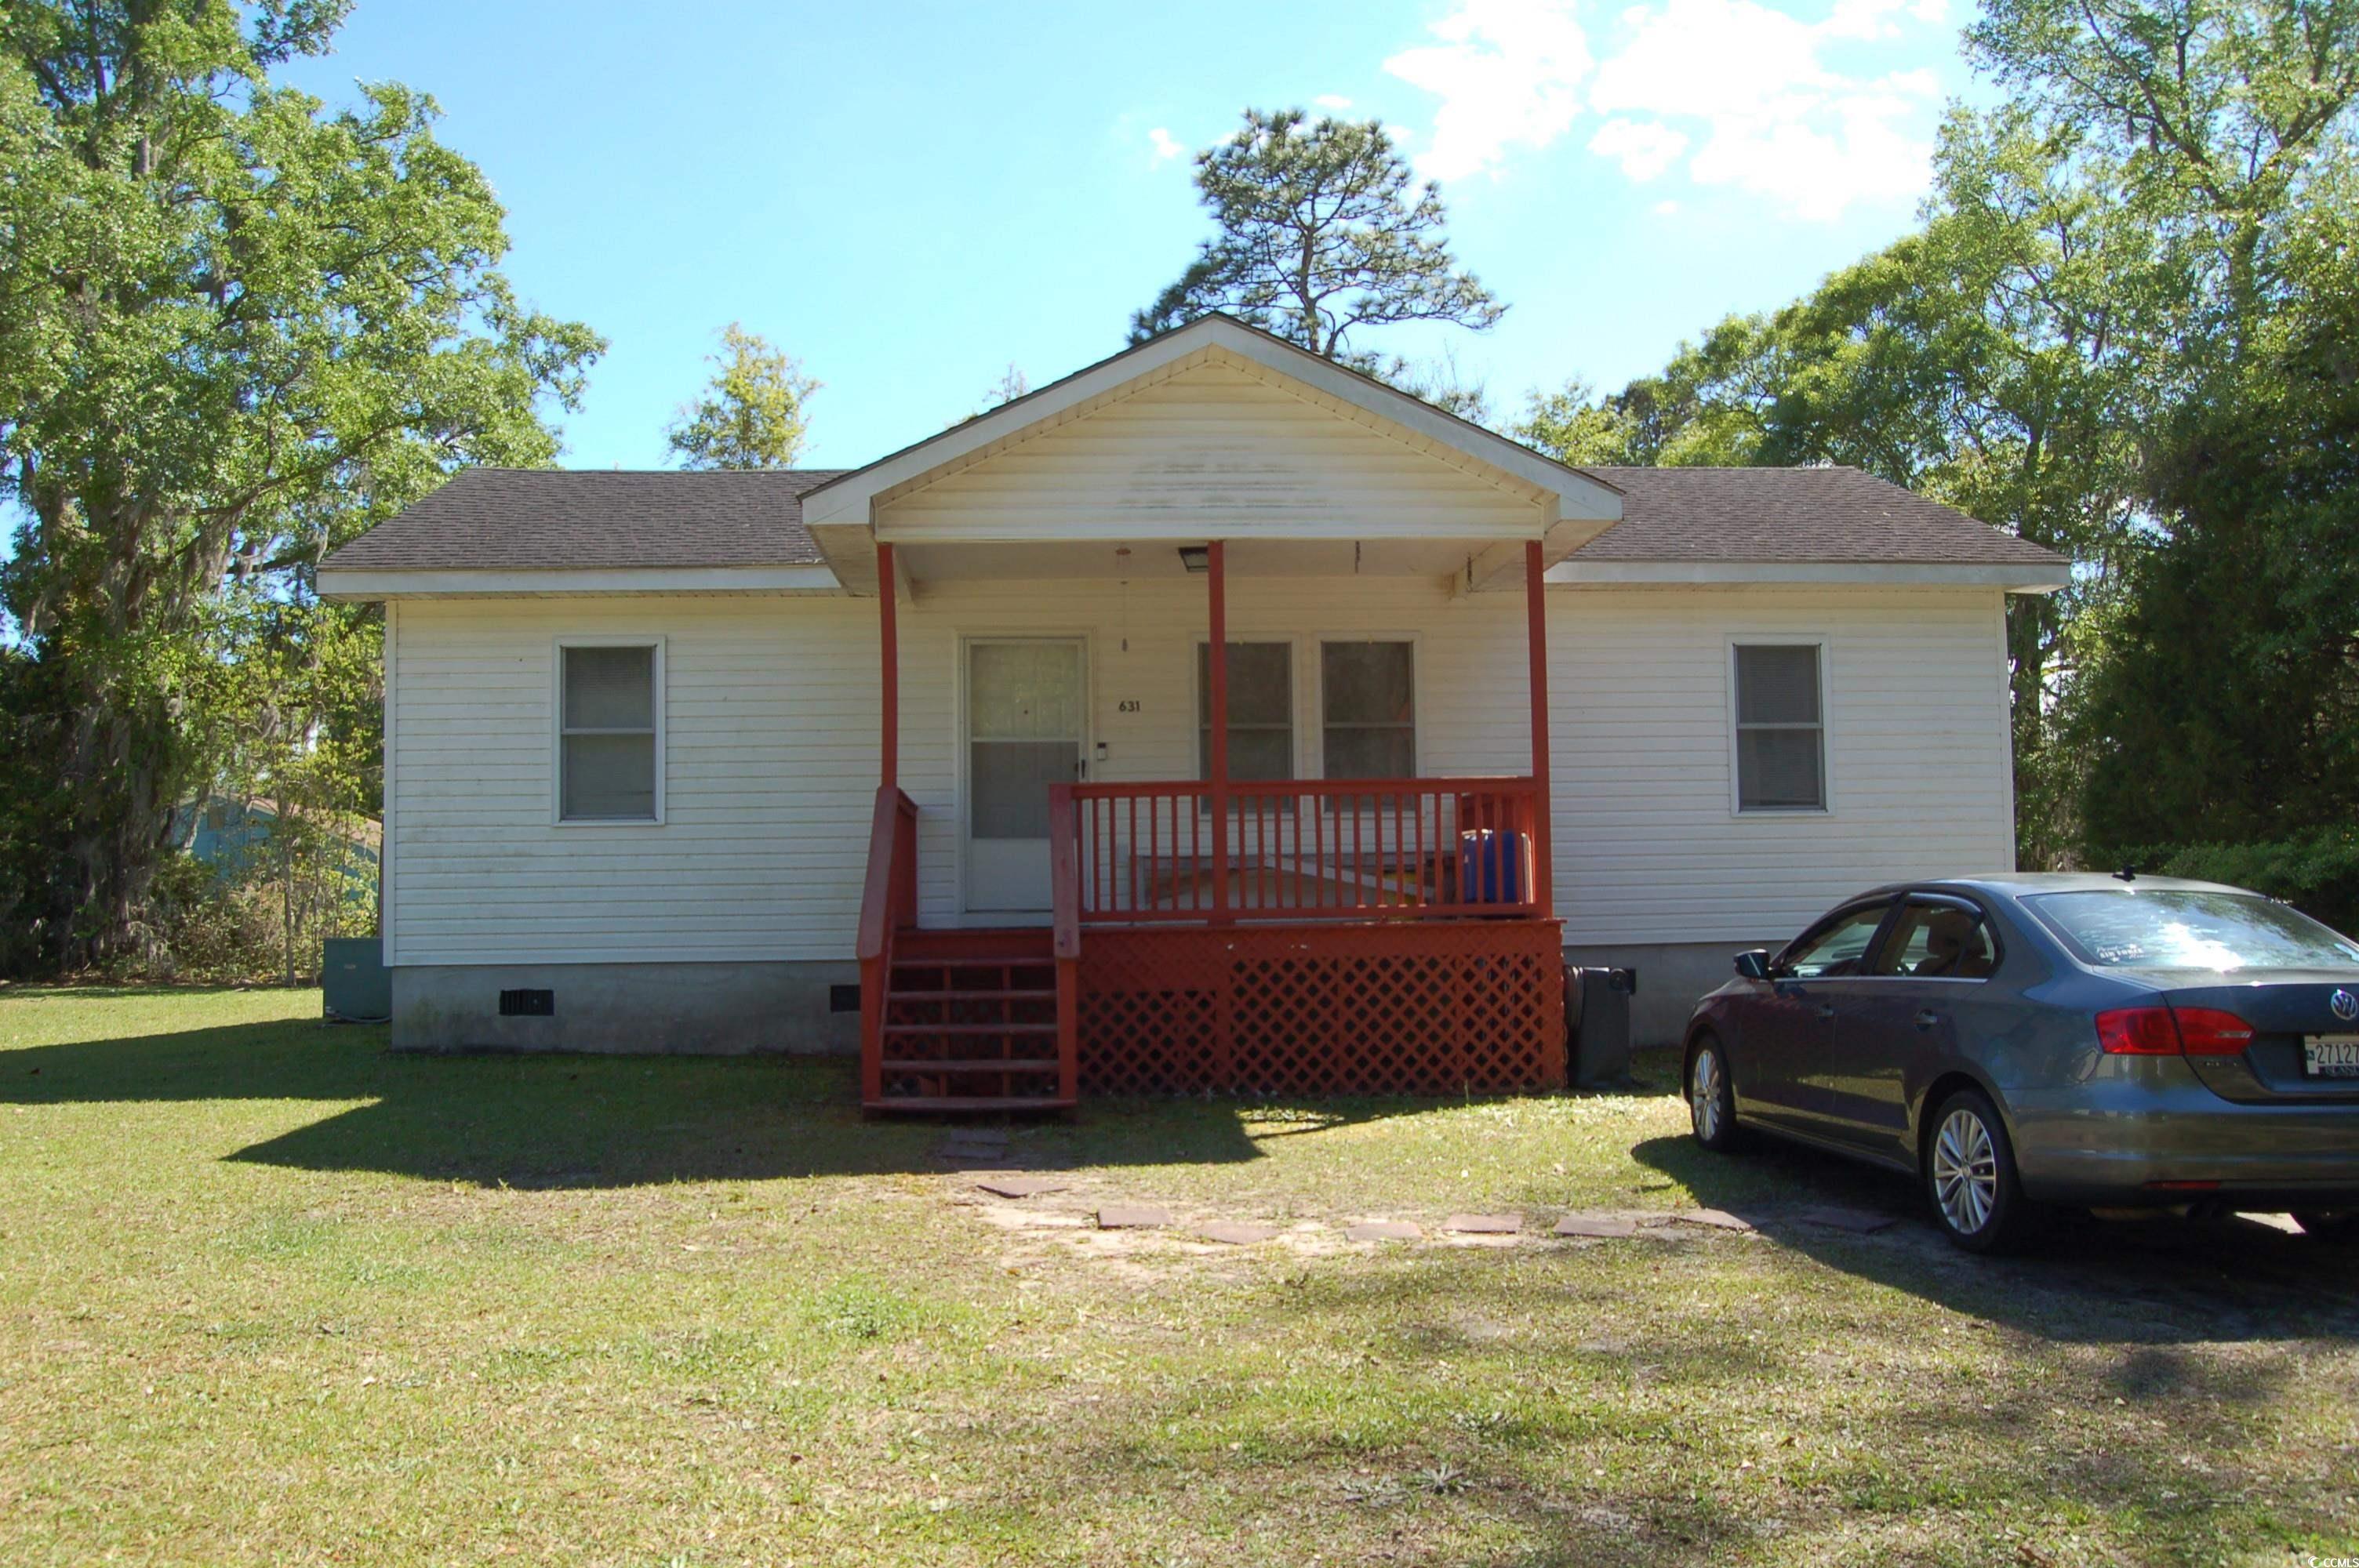 this home is a rental property with long term renter in place. being sold "as is". located in the city of georgetown. close to historic district, shopping and restaurants. square footage is approximate and not guaranteed. buyer is responsible for verification.